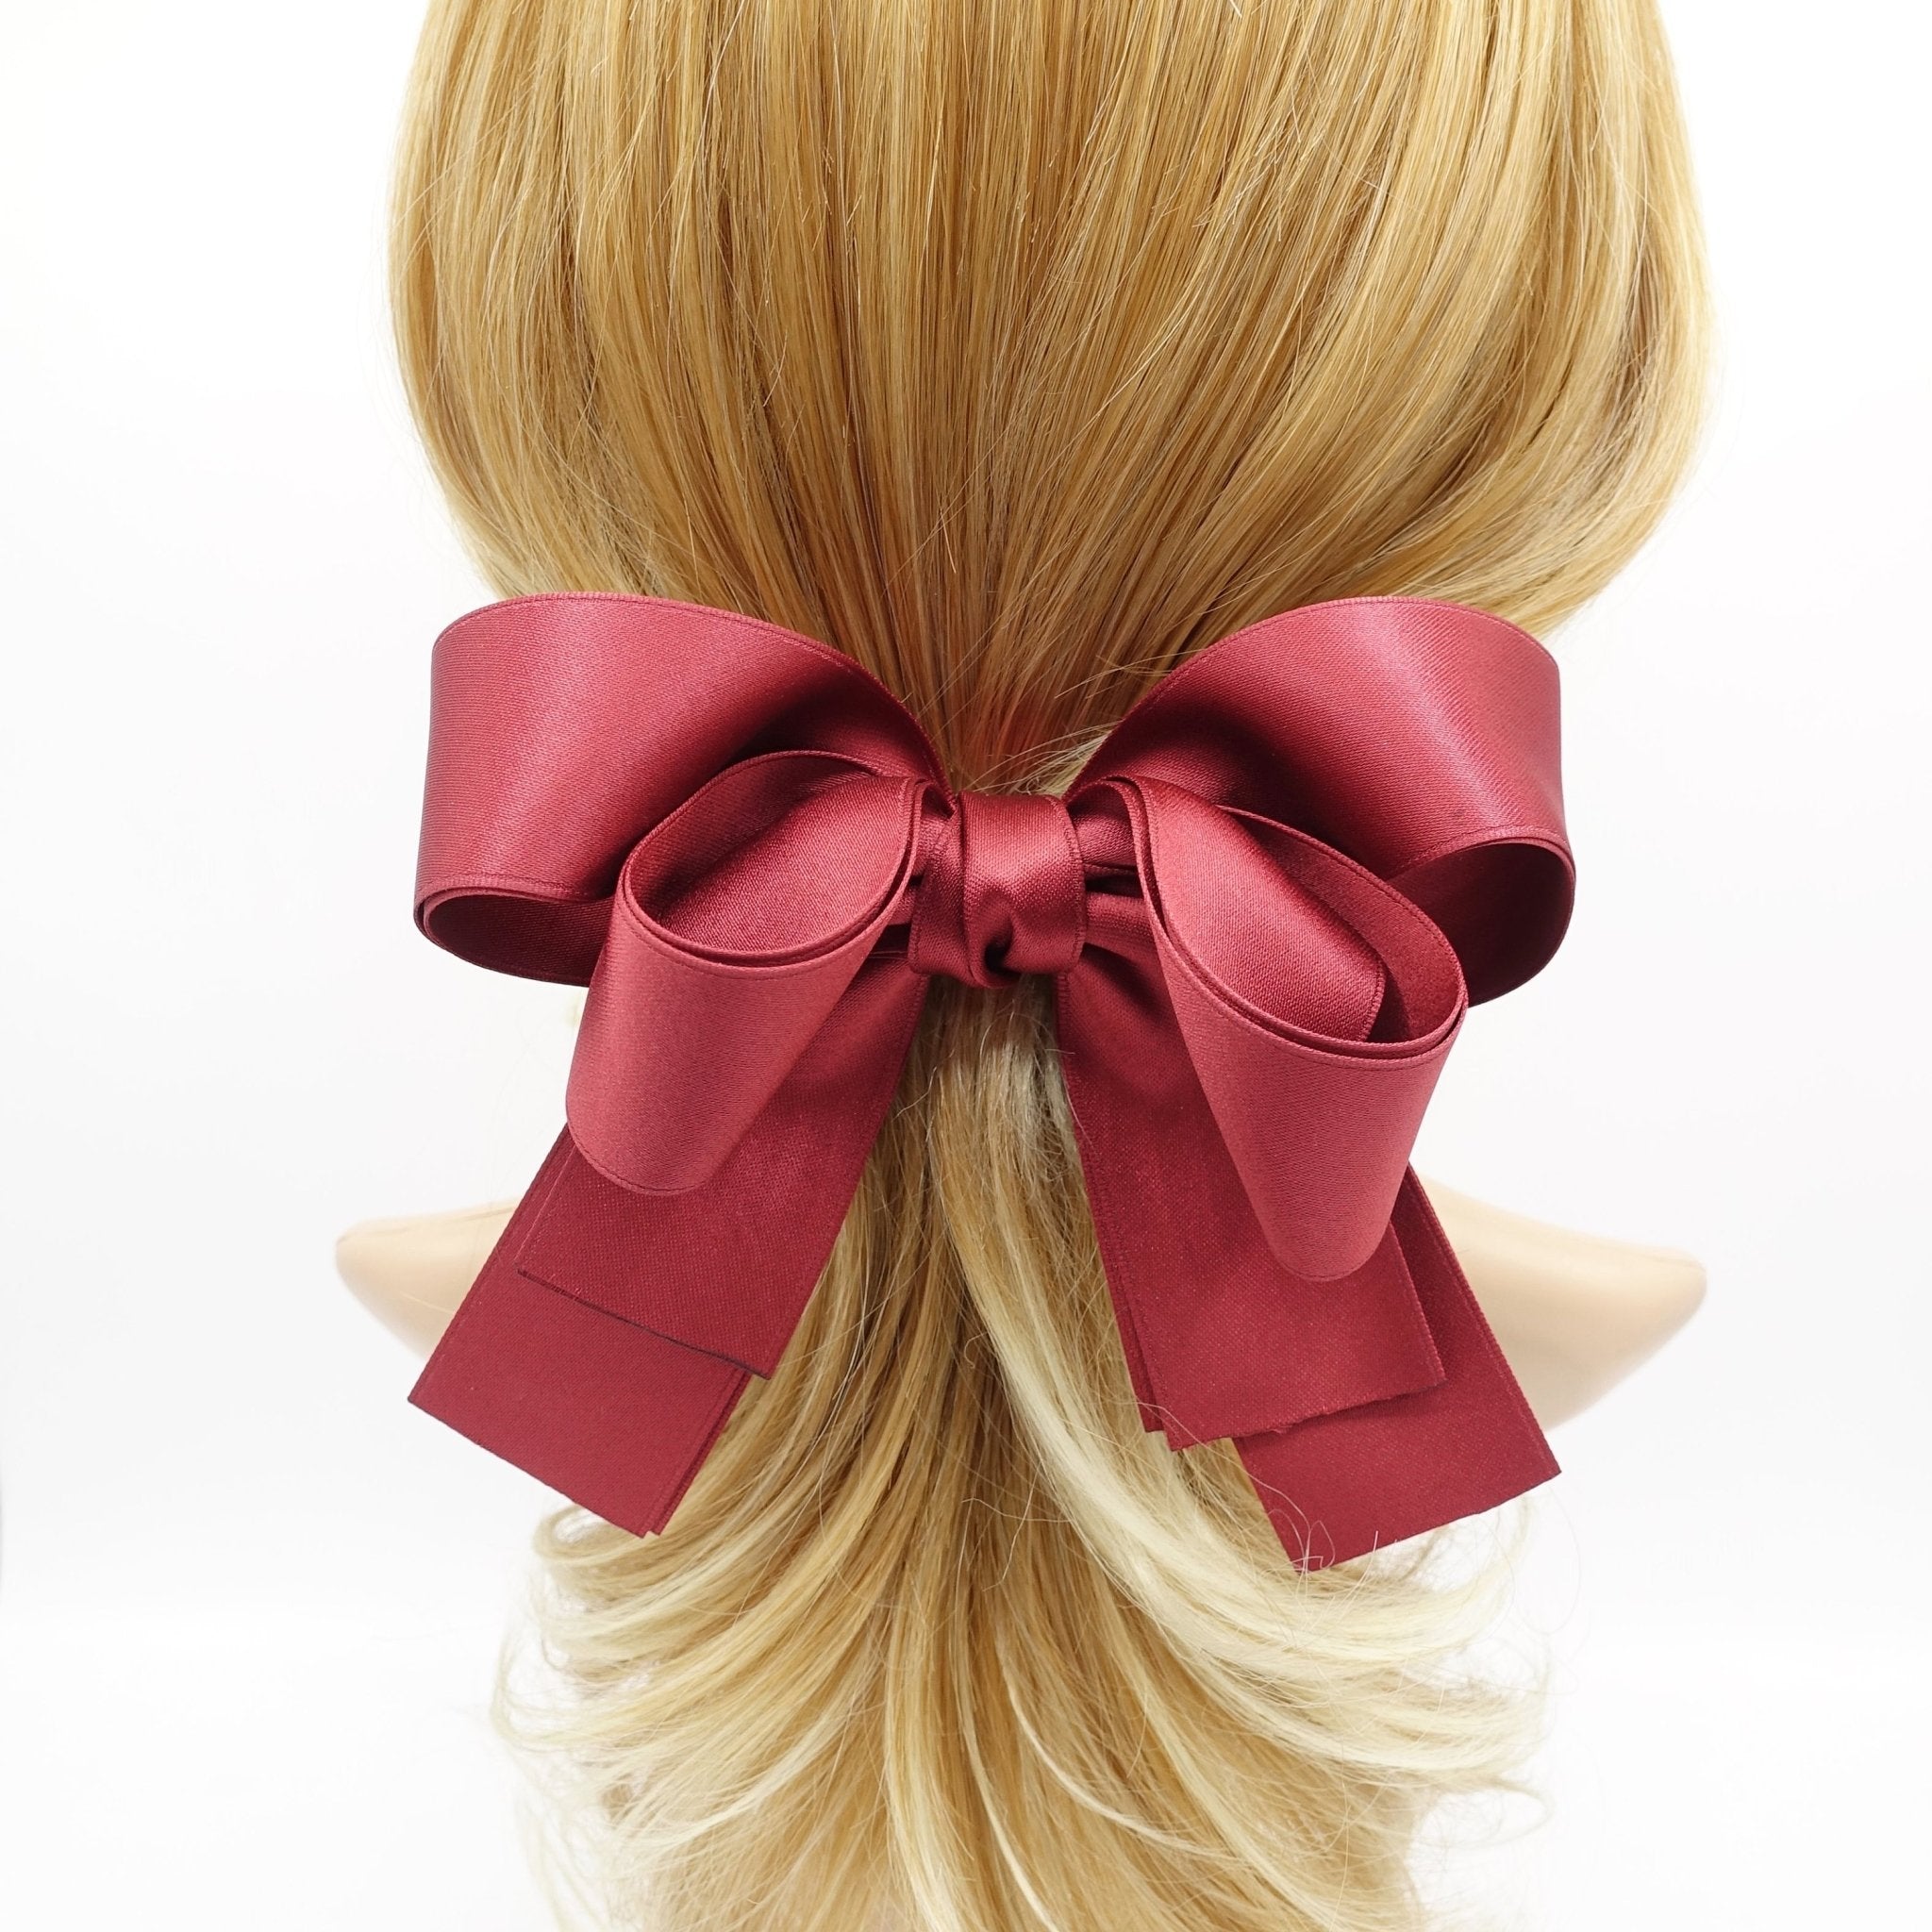 veryshine.com claw/banana/barrette Red wine double layered satin hair bow basic style hair accessory for women